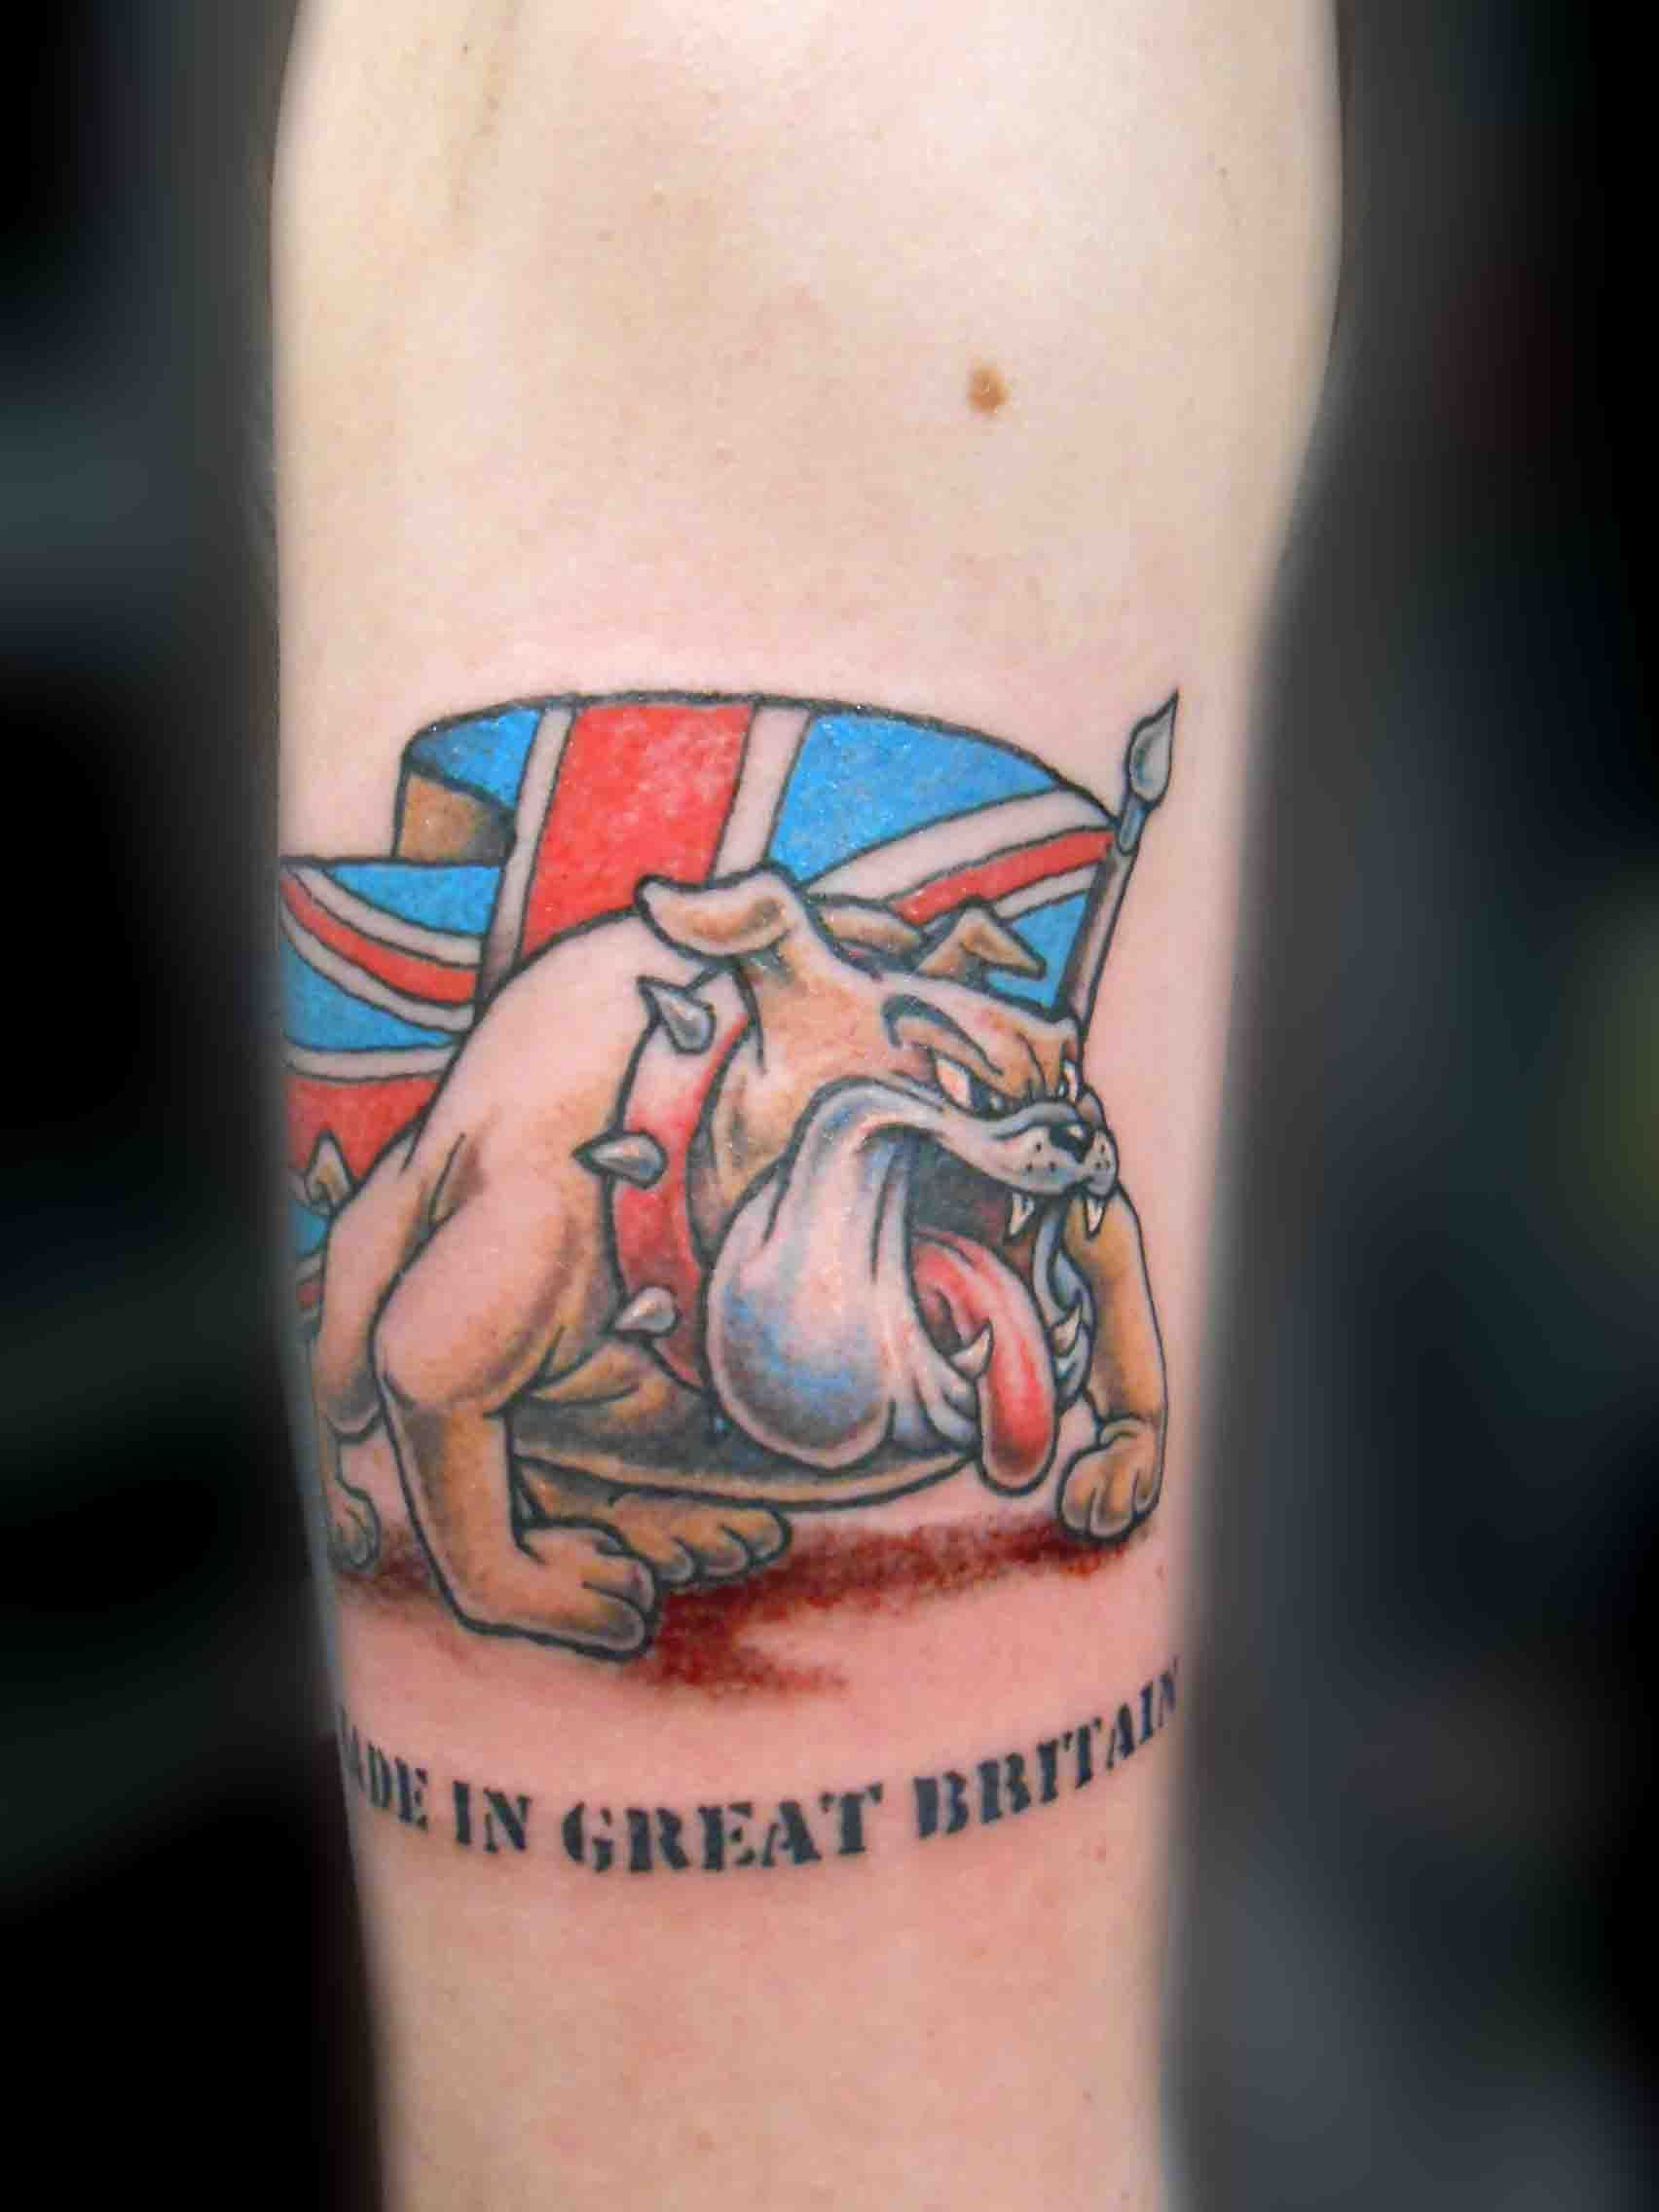 Bulldog Tattoo Tattoos Bulldog Tattoo Tattoos England Tattoo within dimensions 1704 X 2272